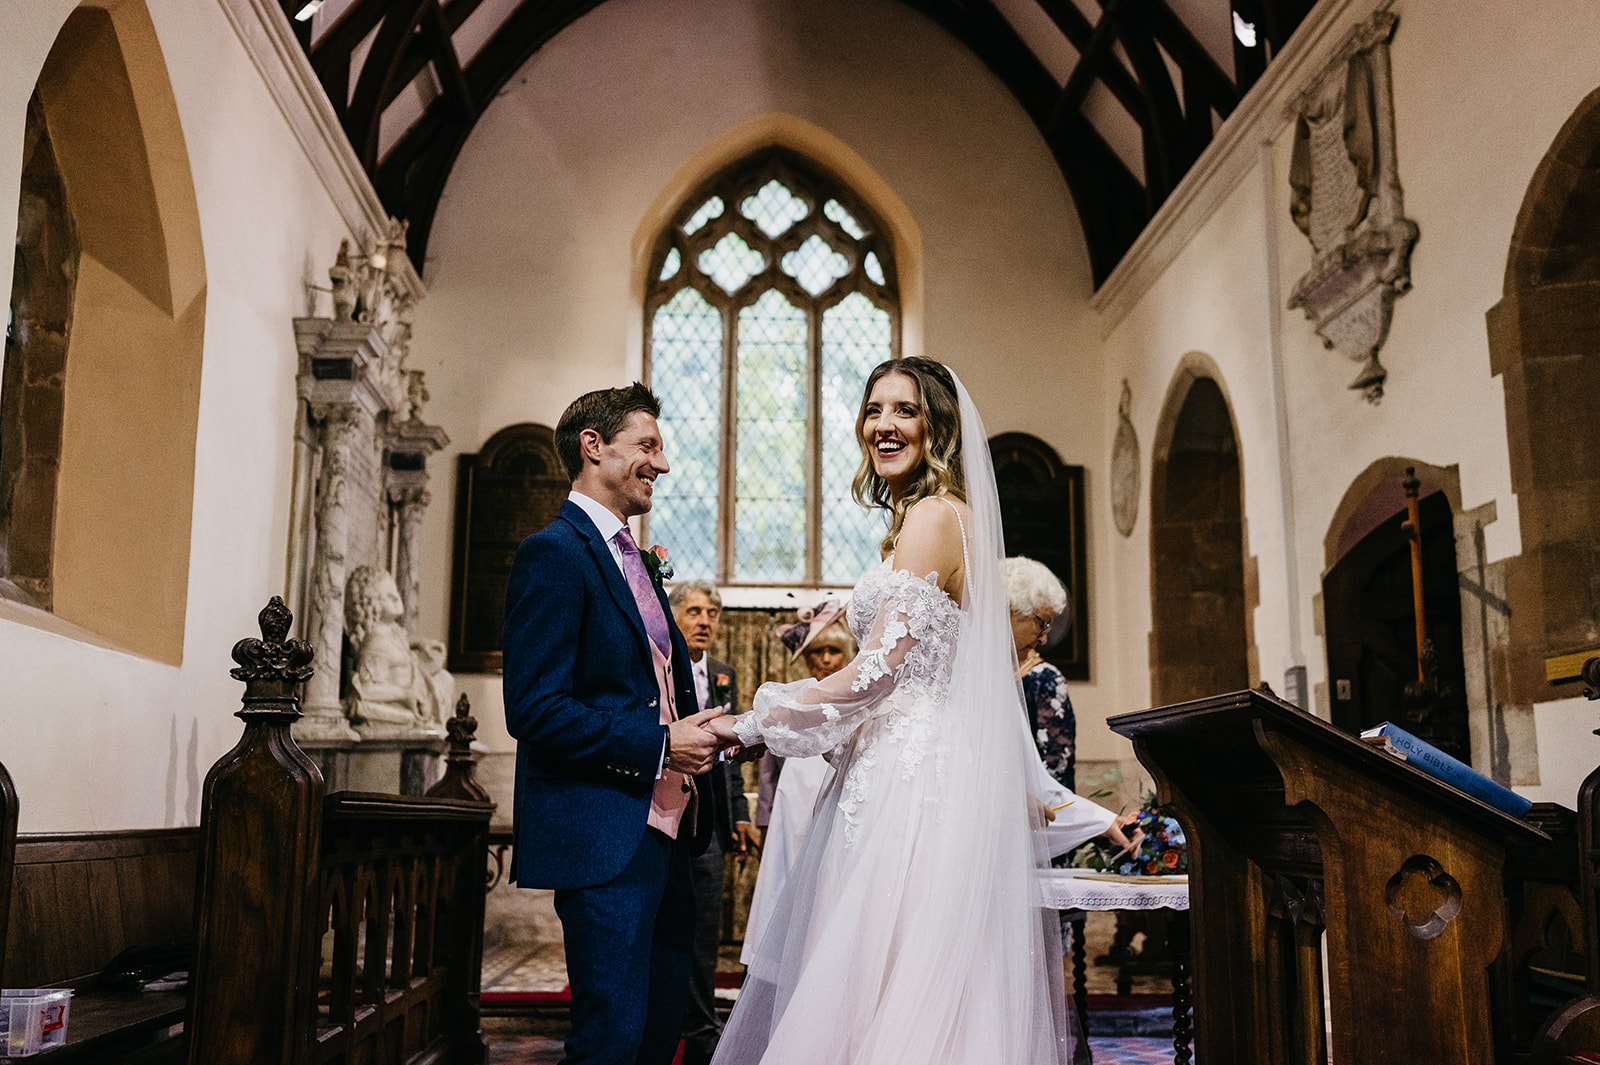 Couple get married at Birtsmorton Court church